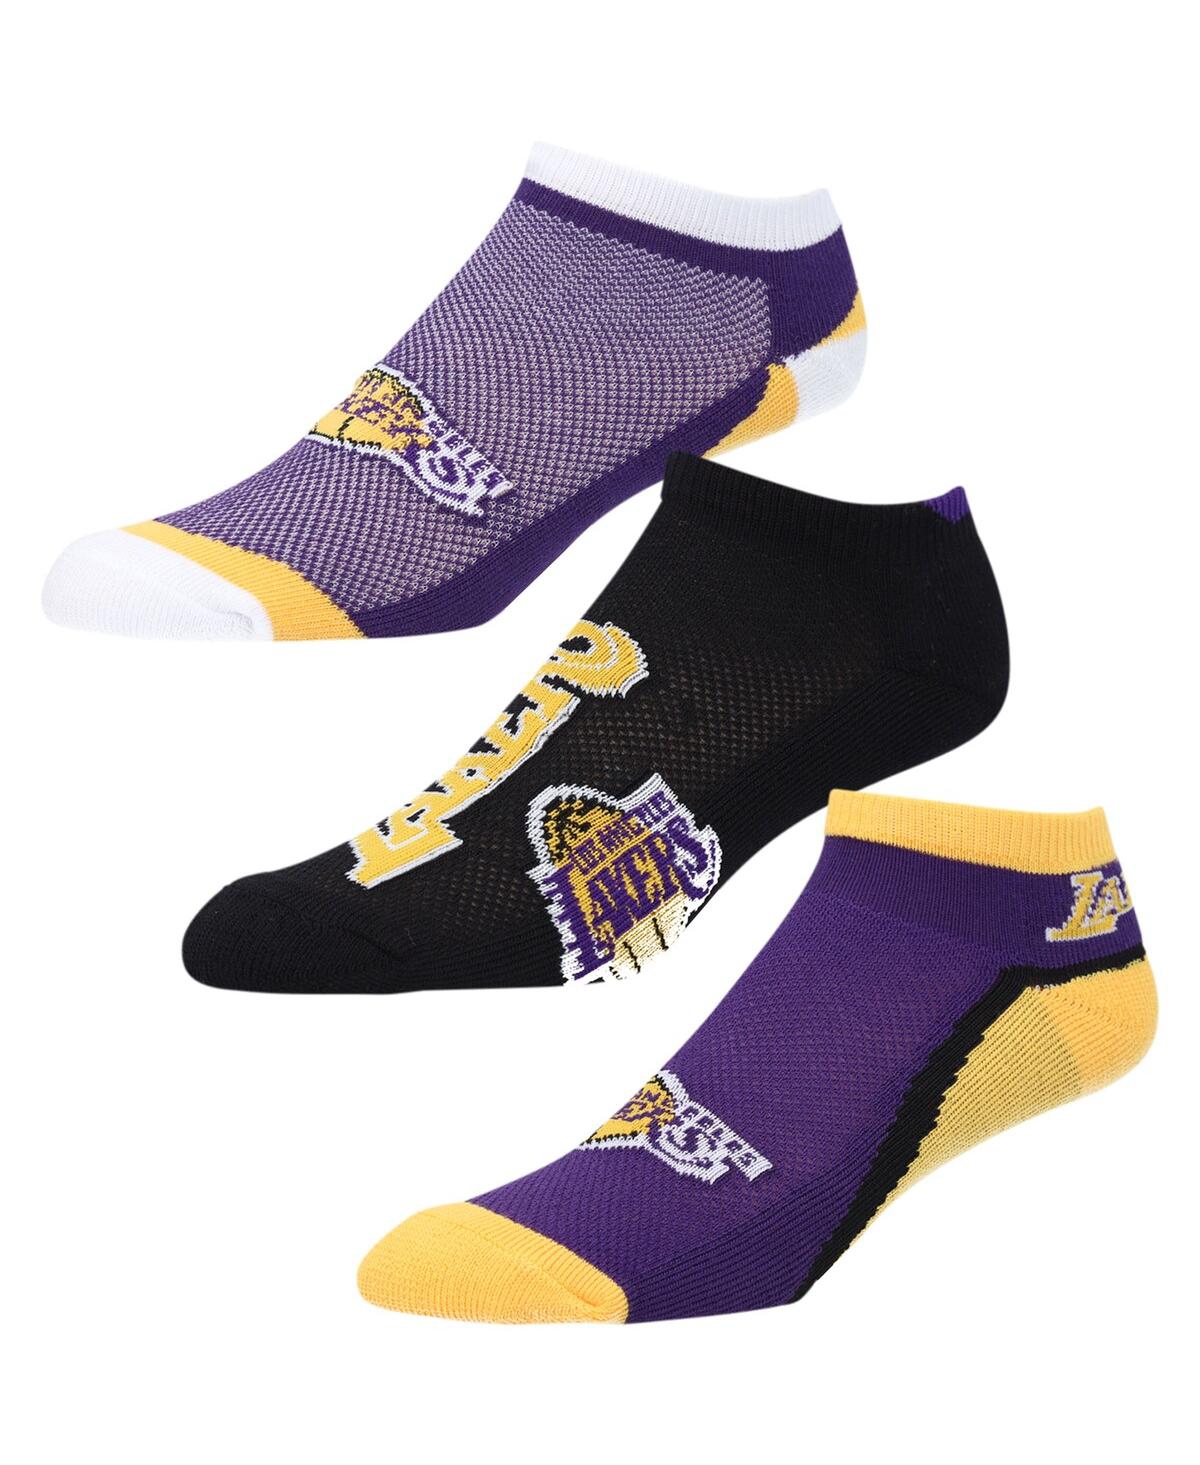 Men's and Women's For Bare Feet Los Angeles Lakers Flash Ankle Socks 3-Pack Set - Multi